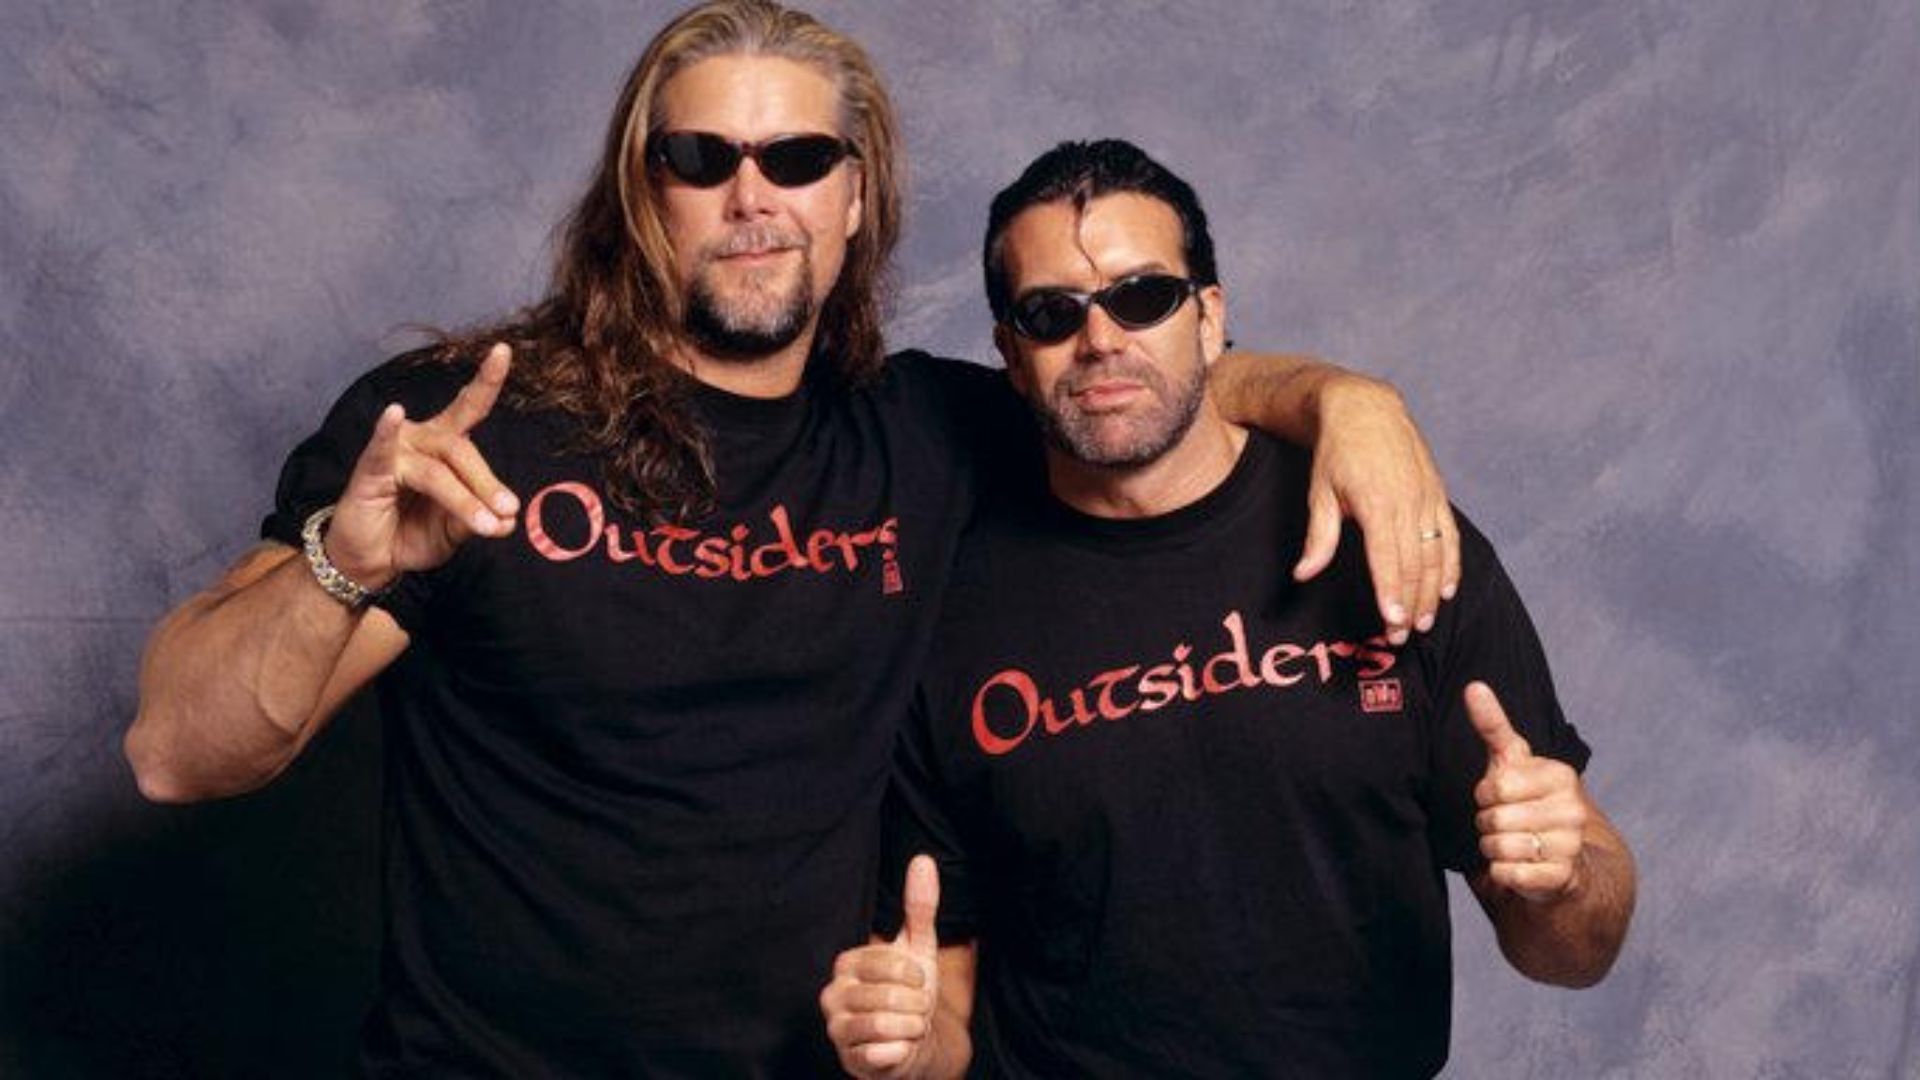 Kevin Nash (left) and Scott Hall (right)